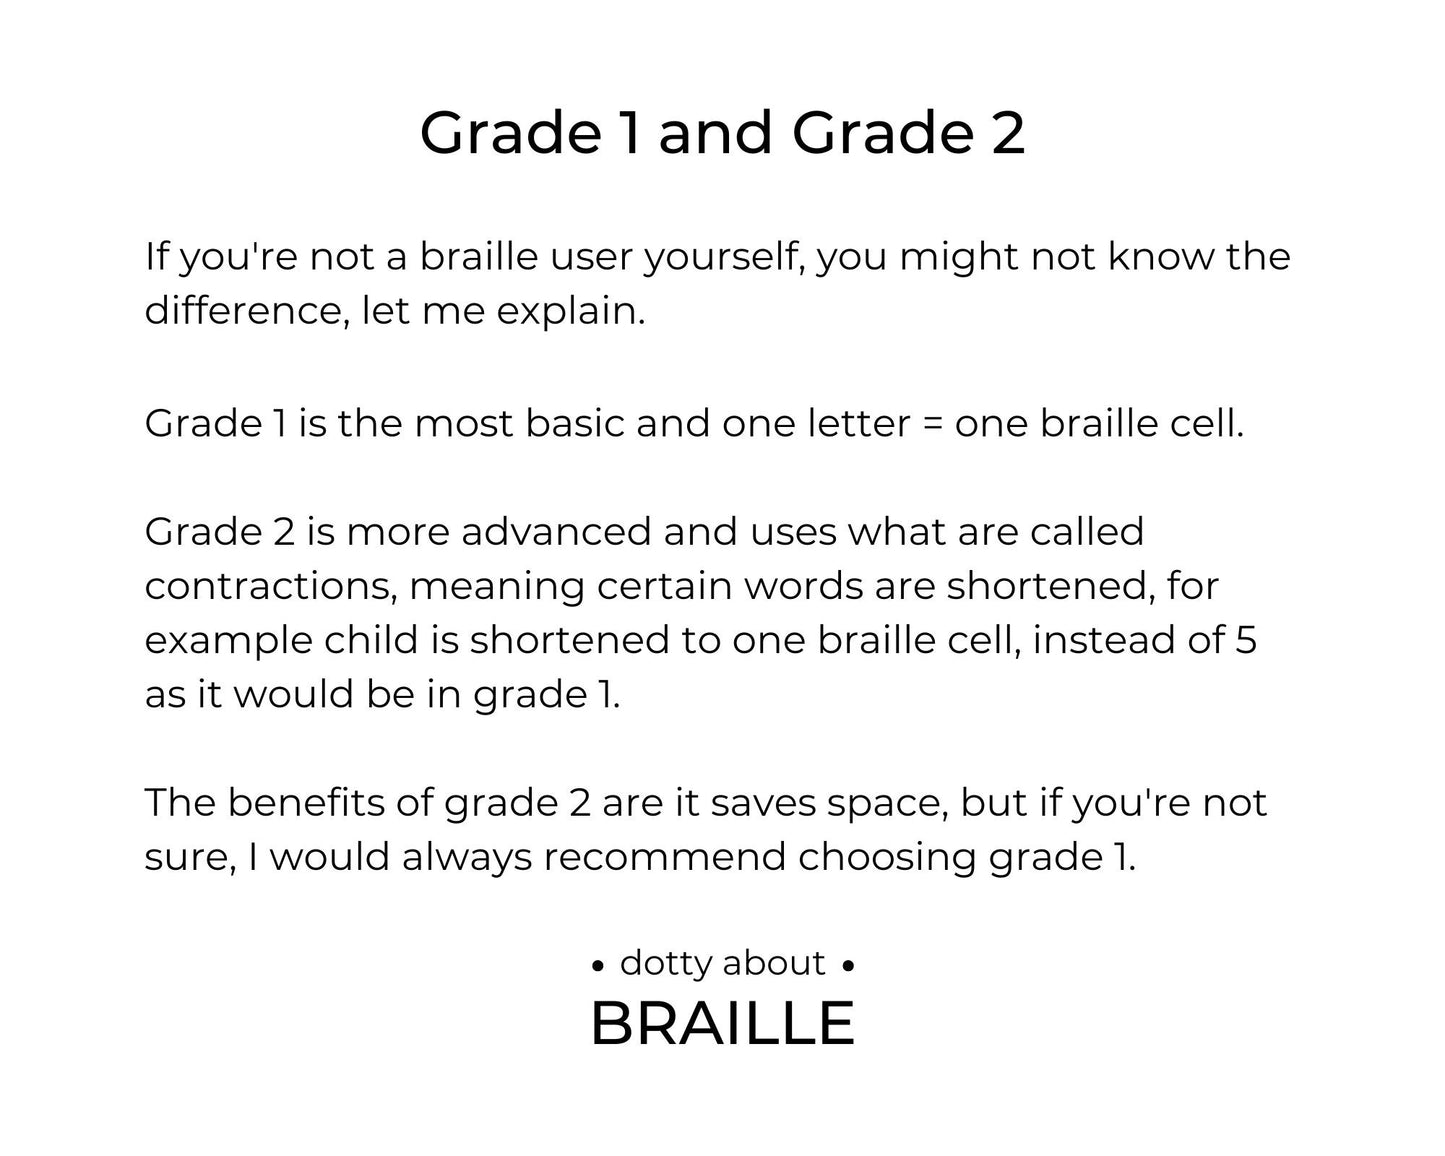 Grade 1, is more basic and one letter is one braille cell. Grade 2, is more advanced and uses contractions to save space, such as child would be shortened to one braille cell, instead of 5.